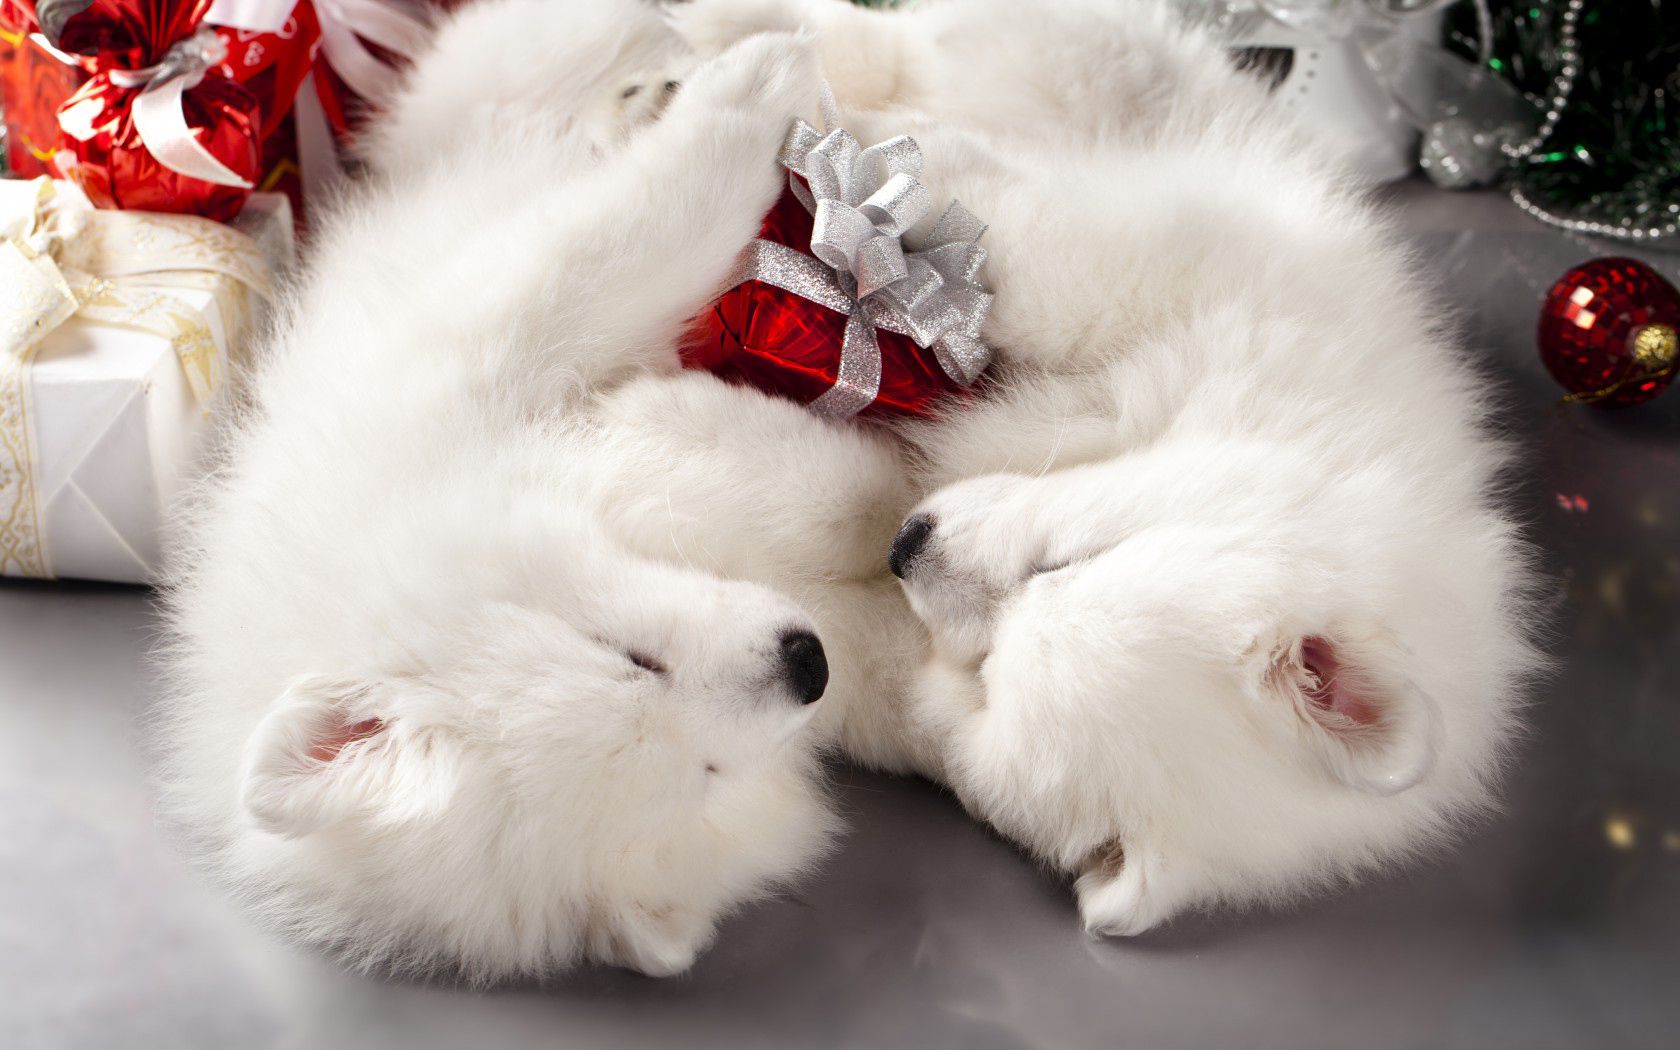 White Puppies Christmas Wallpaper Quality Image And Transparent PNG Free Clipart